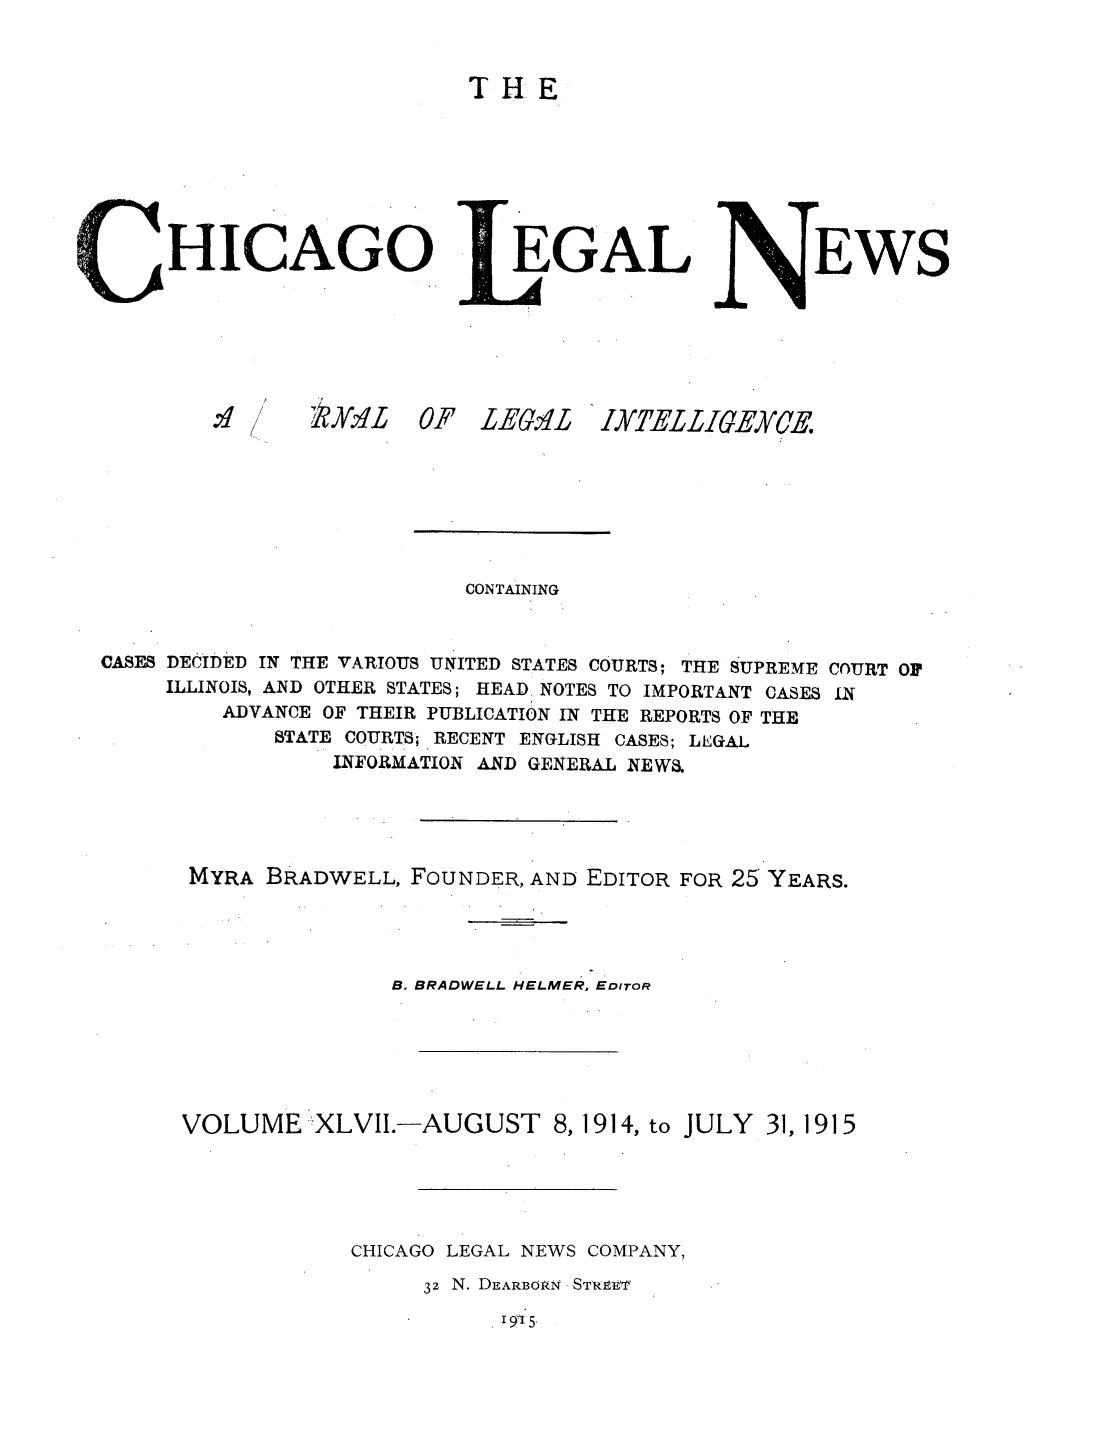 handle is hein.journals/chiclene47 and id is 1 raw text is: T H: EHICAGO/I!Y~L 0EGALF LE.¢[LEWSCONTAININGCASES DECIDED IN THE VARIOUS UNITED STATES COURTS; THE SUPREME COURT OFILLINOIS, AND OTHER STATES; HEAD NOTES TO IMPORTANT CASES INADVANCE OF THEIR PUBLICATION IN THE REPORTS OF THEBTATE COURTS; RECENT ENGLISH CASES; LEGALINFORMATION AND GENERAL NEW.MYRA BRADWELL, FOUNDER, AND EDITOR FOR 25 YEARS.B. BRADWELL HELMER, EDITORVOLUME XLVII.-AUGUST 8, 1914, to JULY 31, 1915CHICAGO LEGAL NEWS COMPANY,3z N. DEARBOIN - STREETI'19I5.IXTELLIGEXCE.